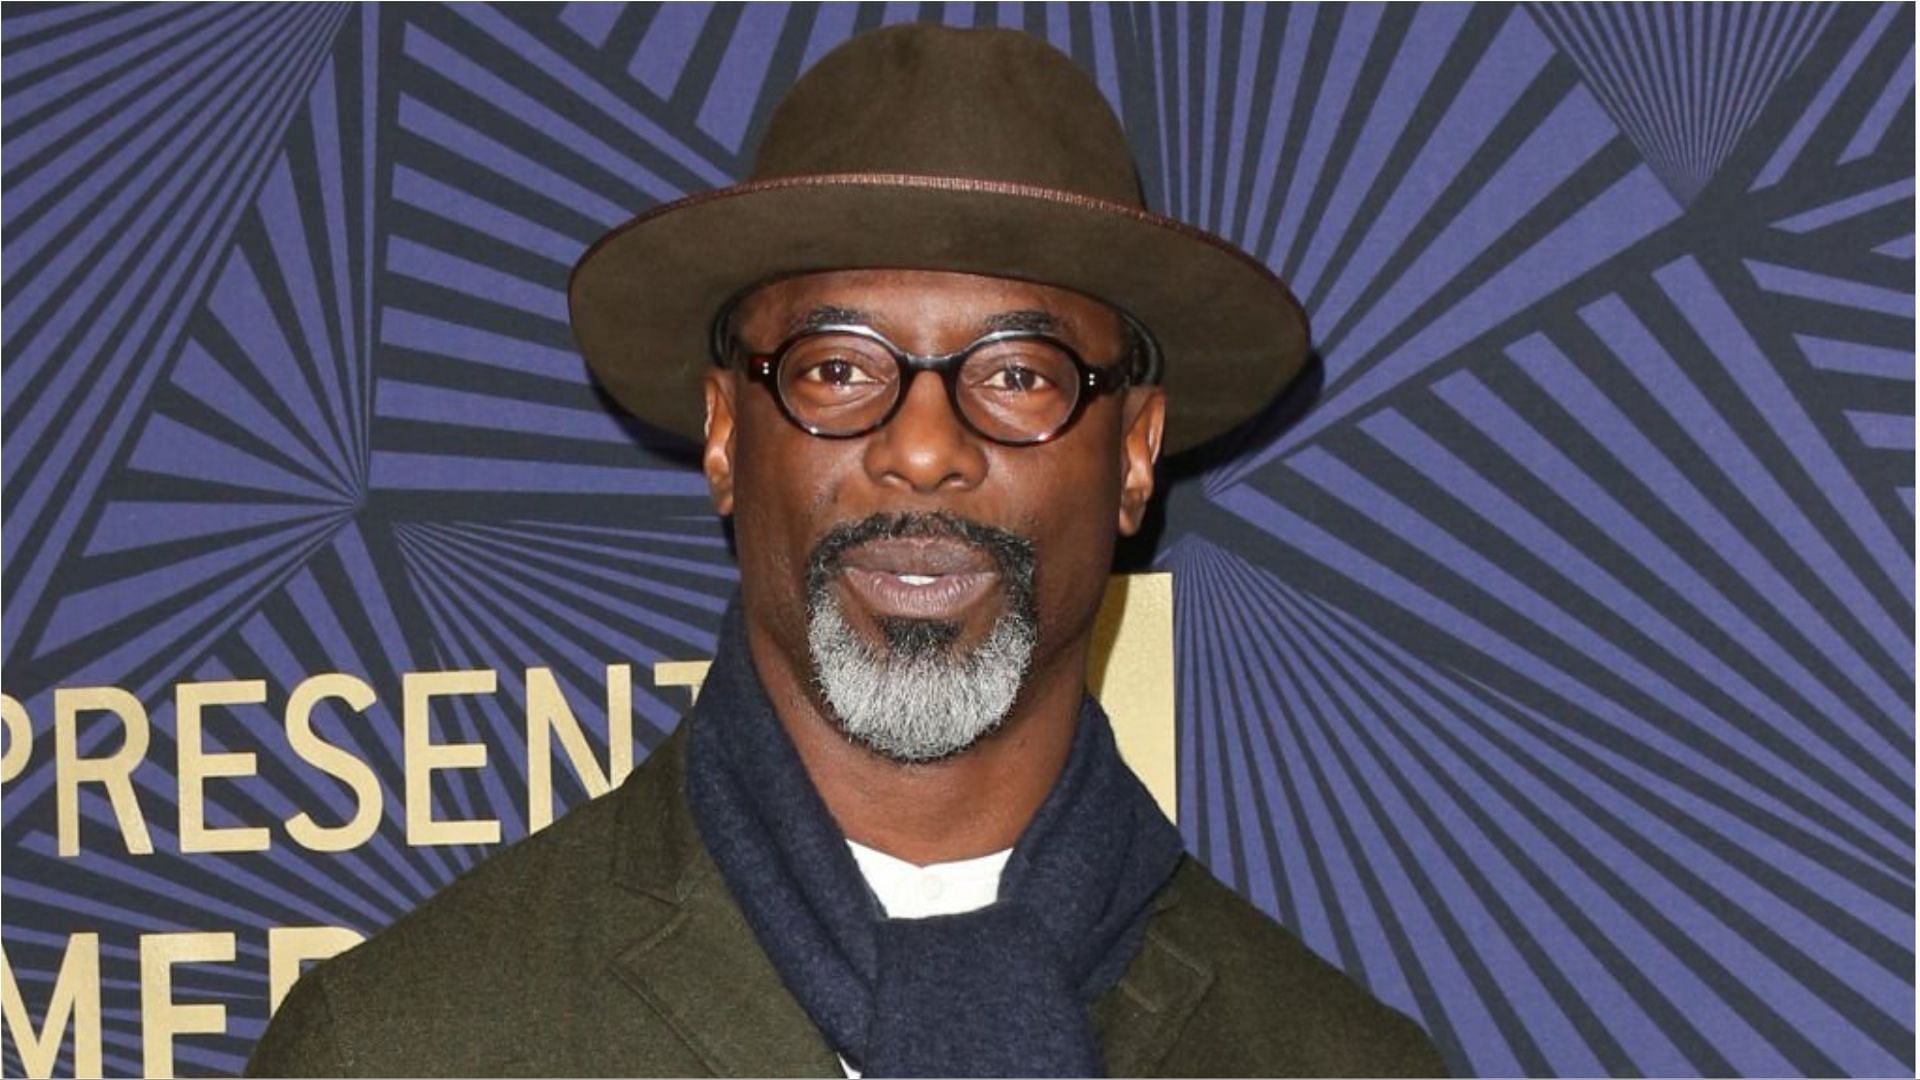 Isaiah Washington has earned a lot from his career in films and TV shows (Image via Paul Archuleta/Getty Images)